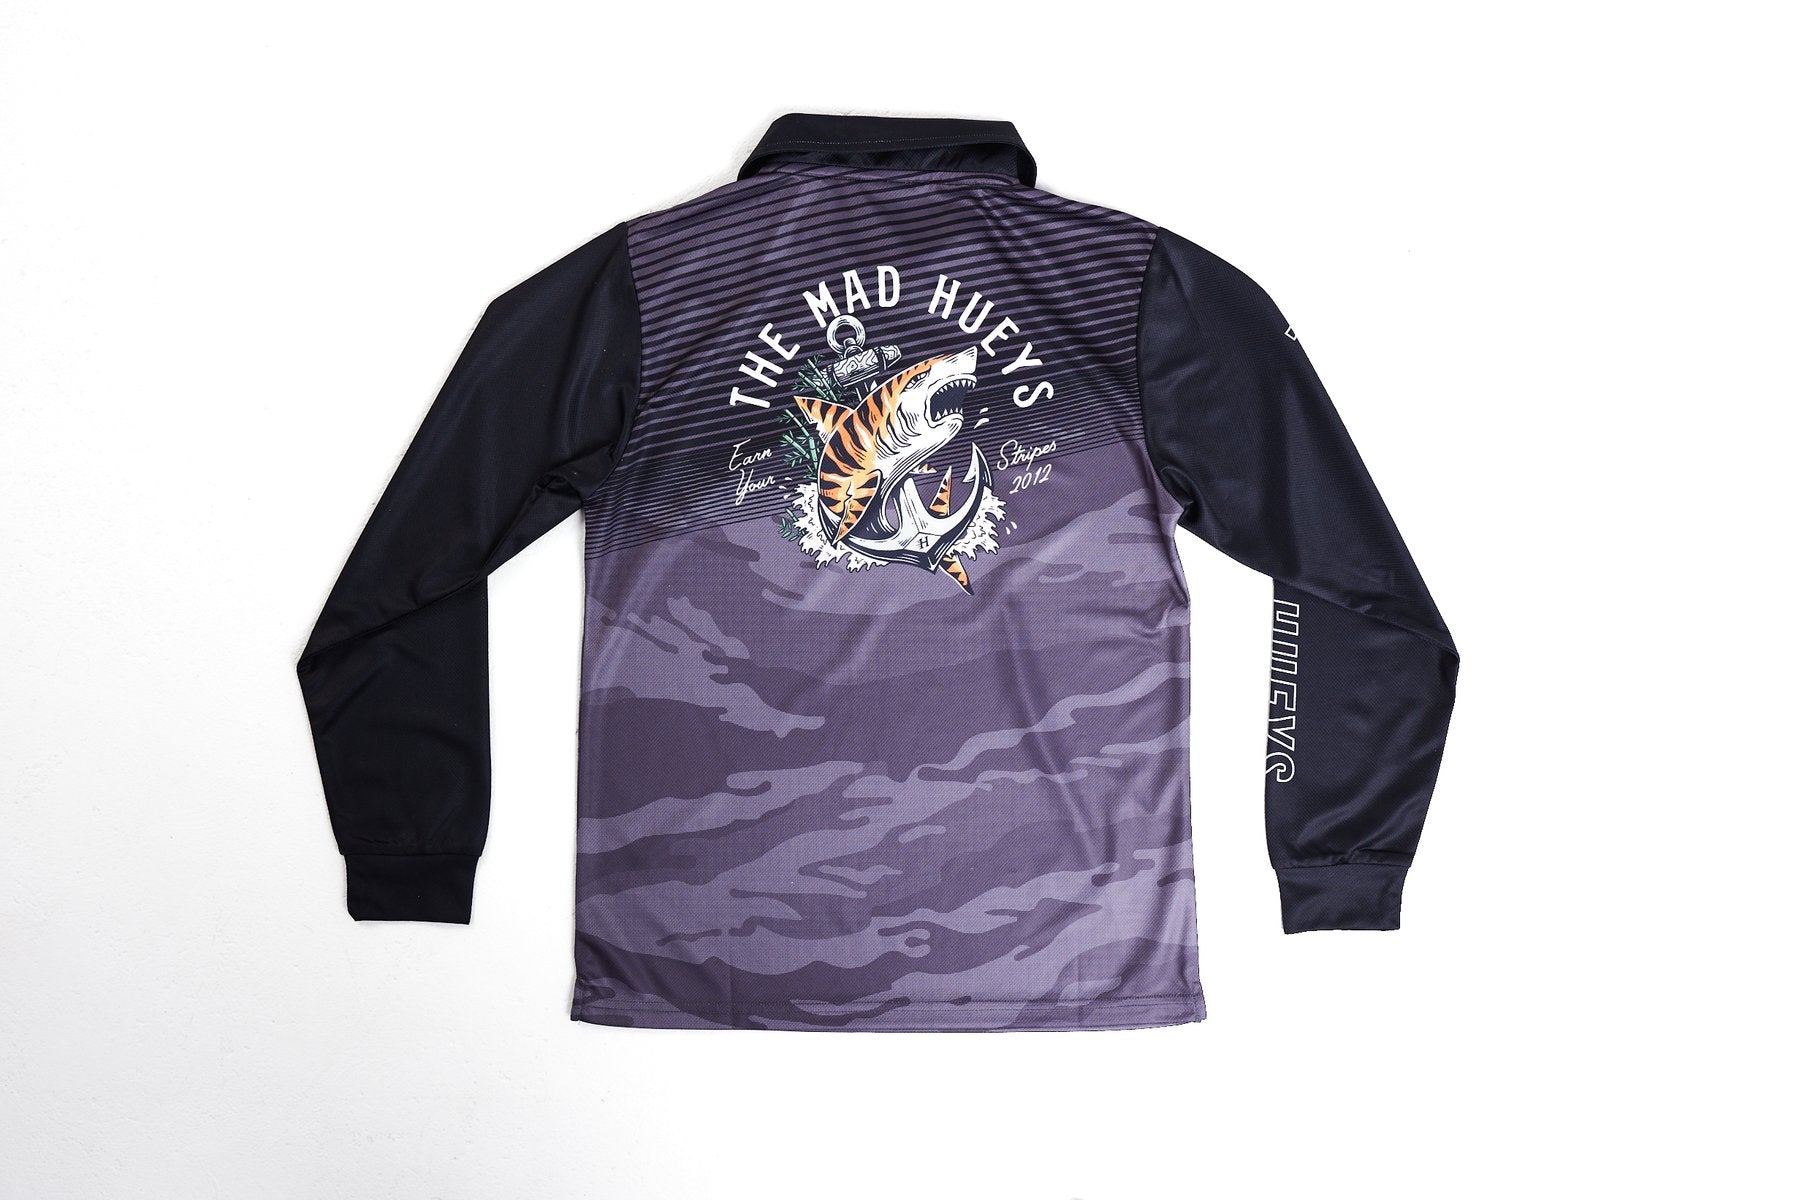 EARN YOUR STRIPES YOUTH FISHING JERSEY